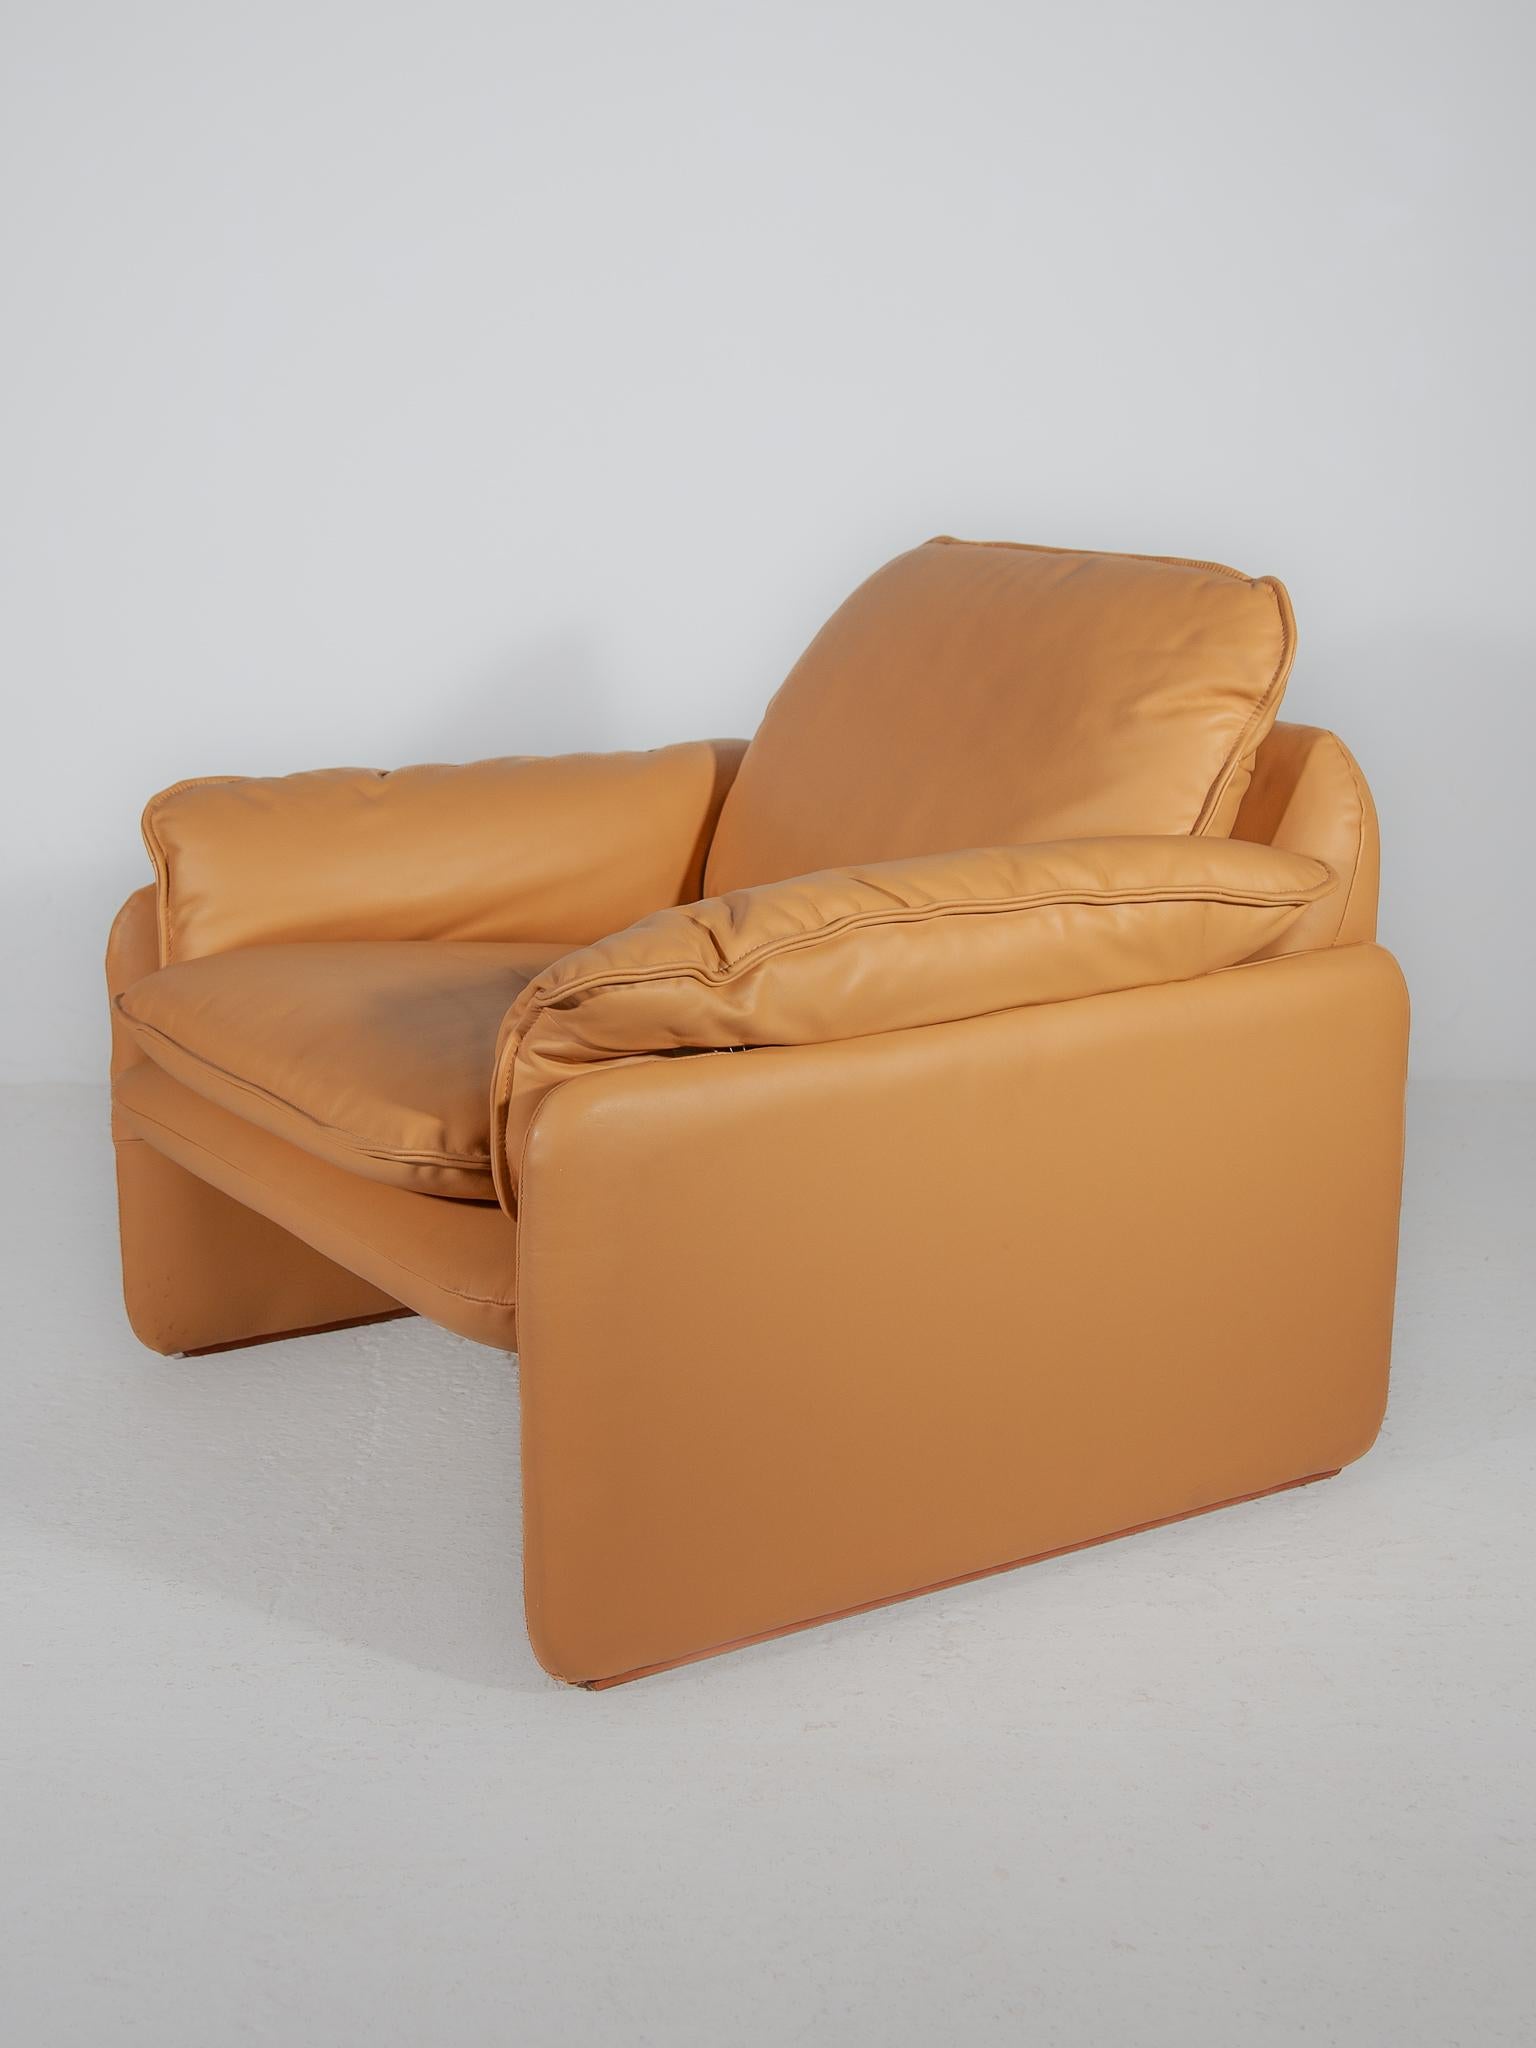 Set of 2 Ds-61 Armchairs Camel Leather designed by De Sede, 1970s For Sale 1